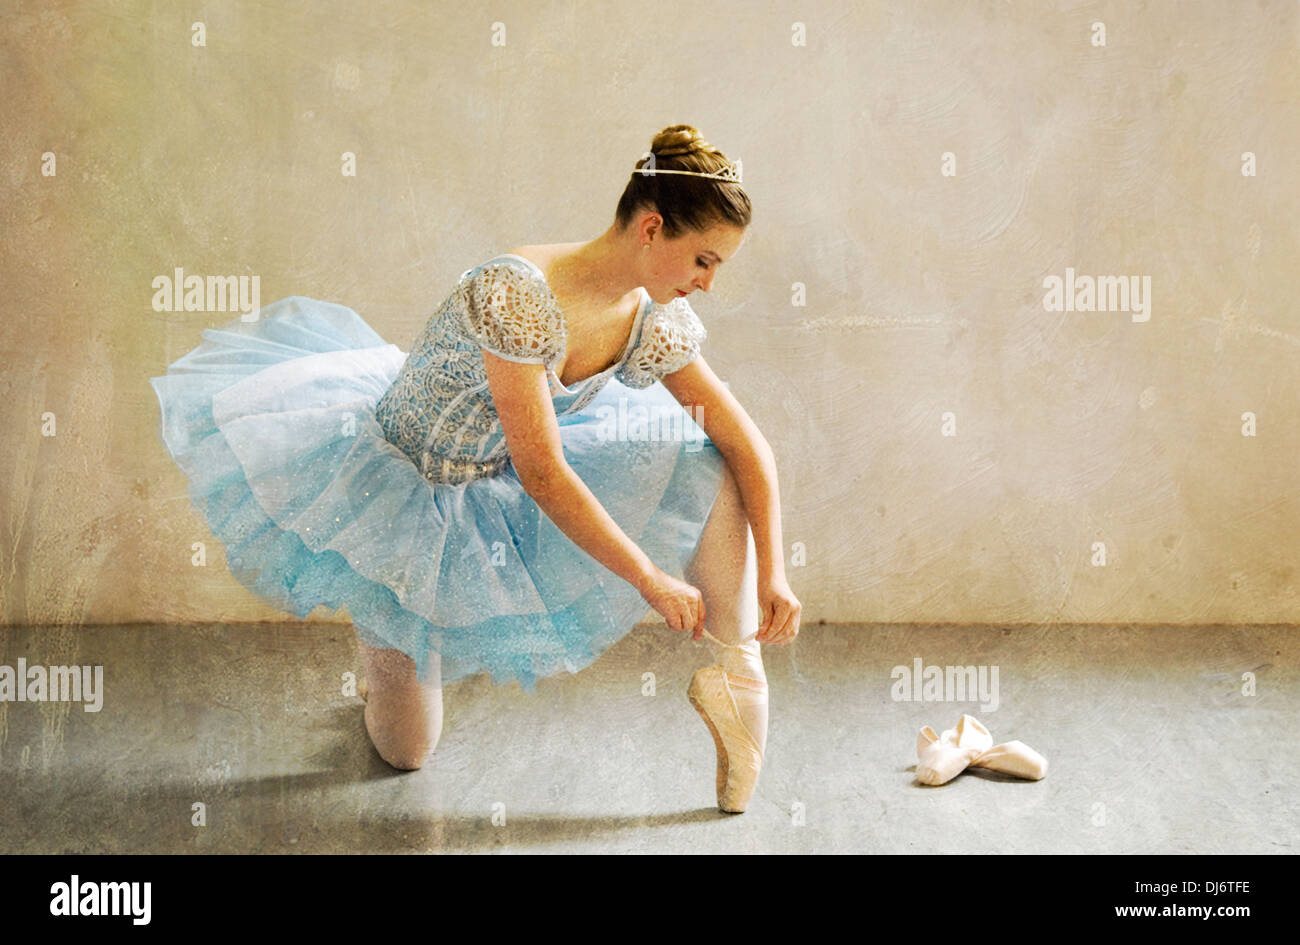 Young Ballerina Sitting on the Floor of a Studio Tying Her Ballet Slippers Stock Photo